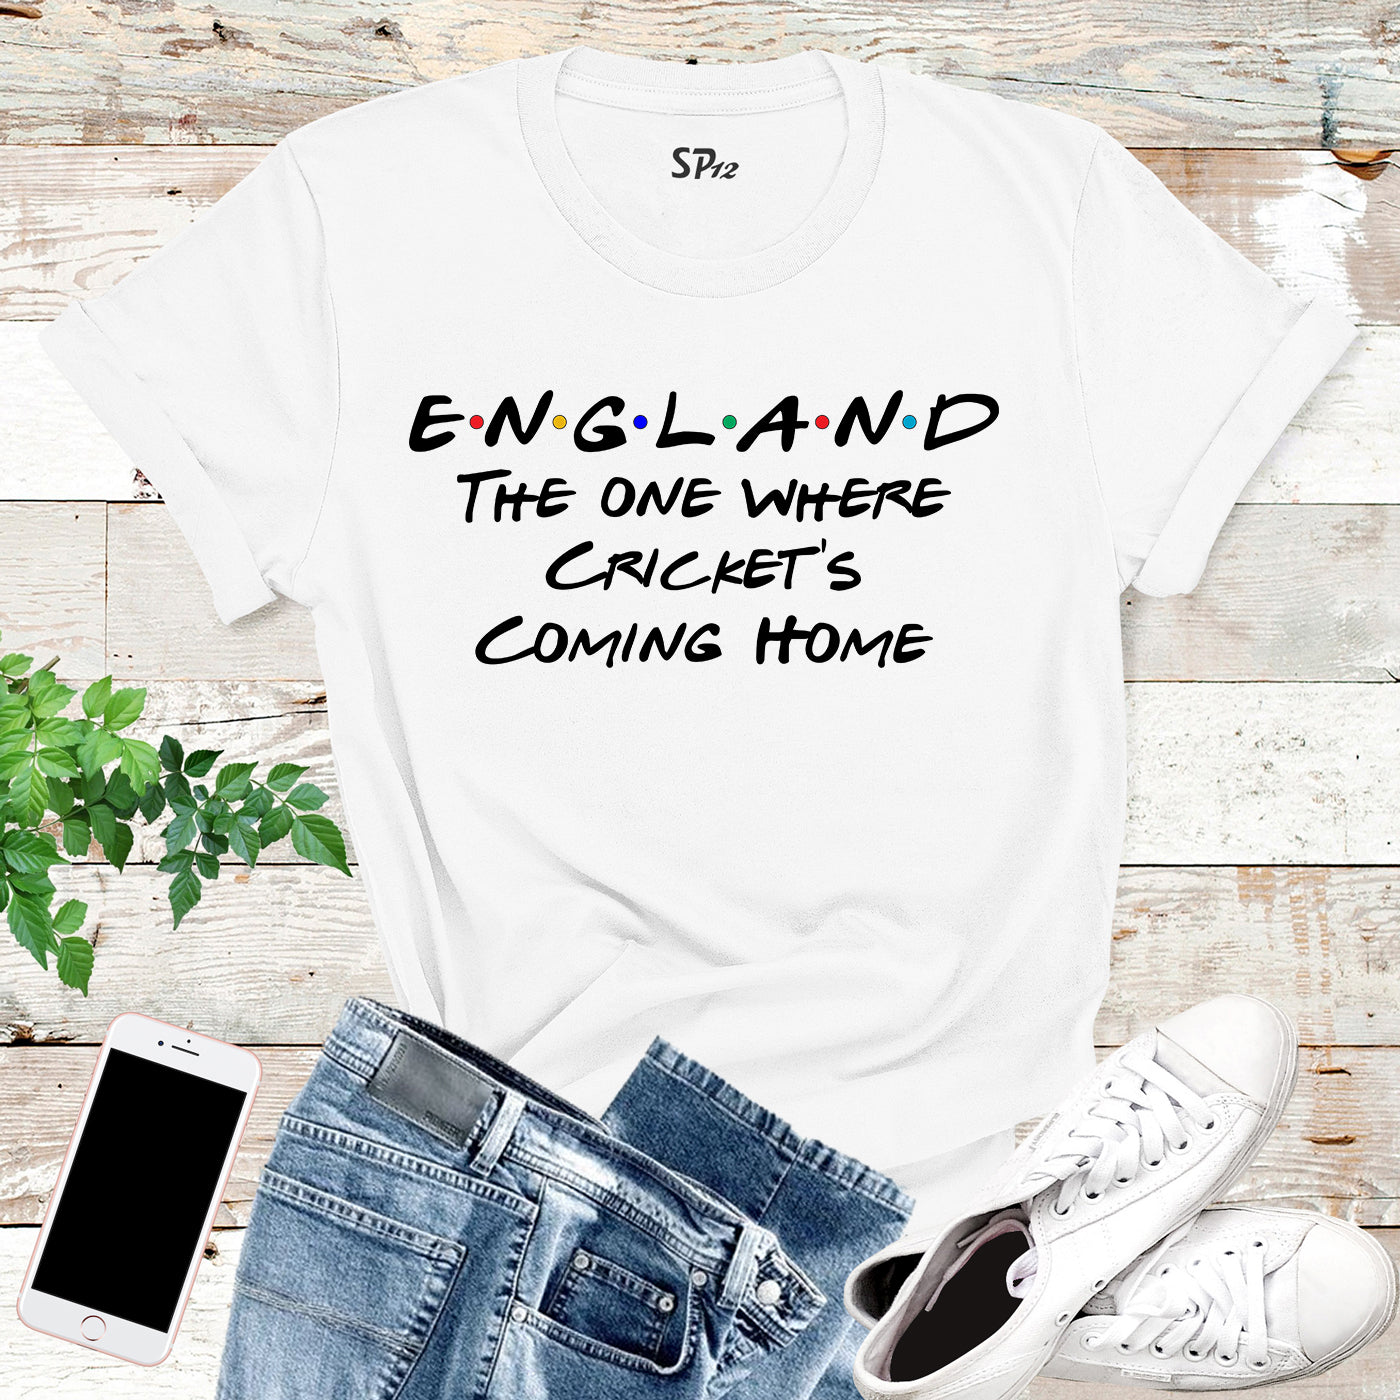 England The One Where Cricket's Coming Home T Shirt